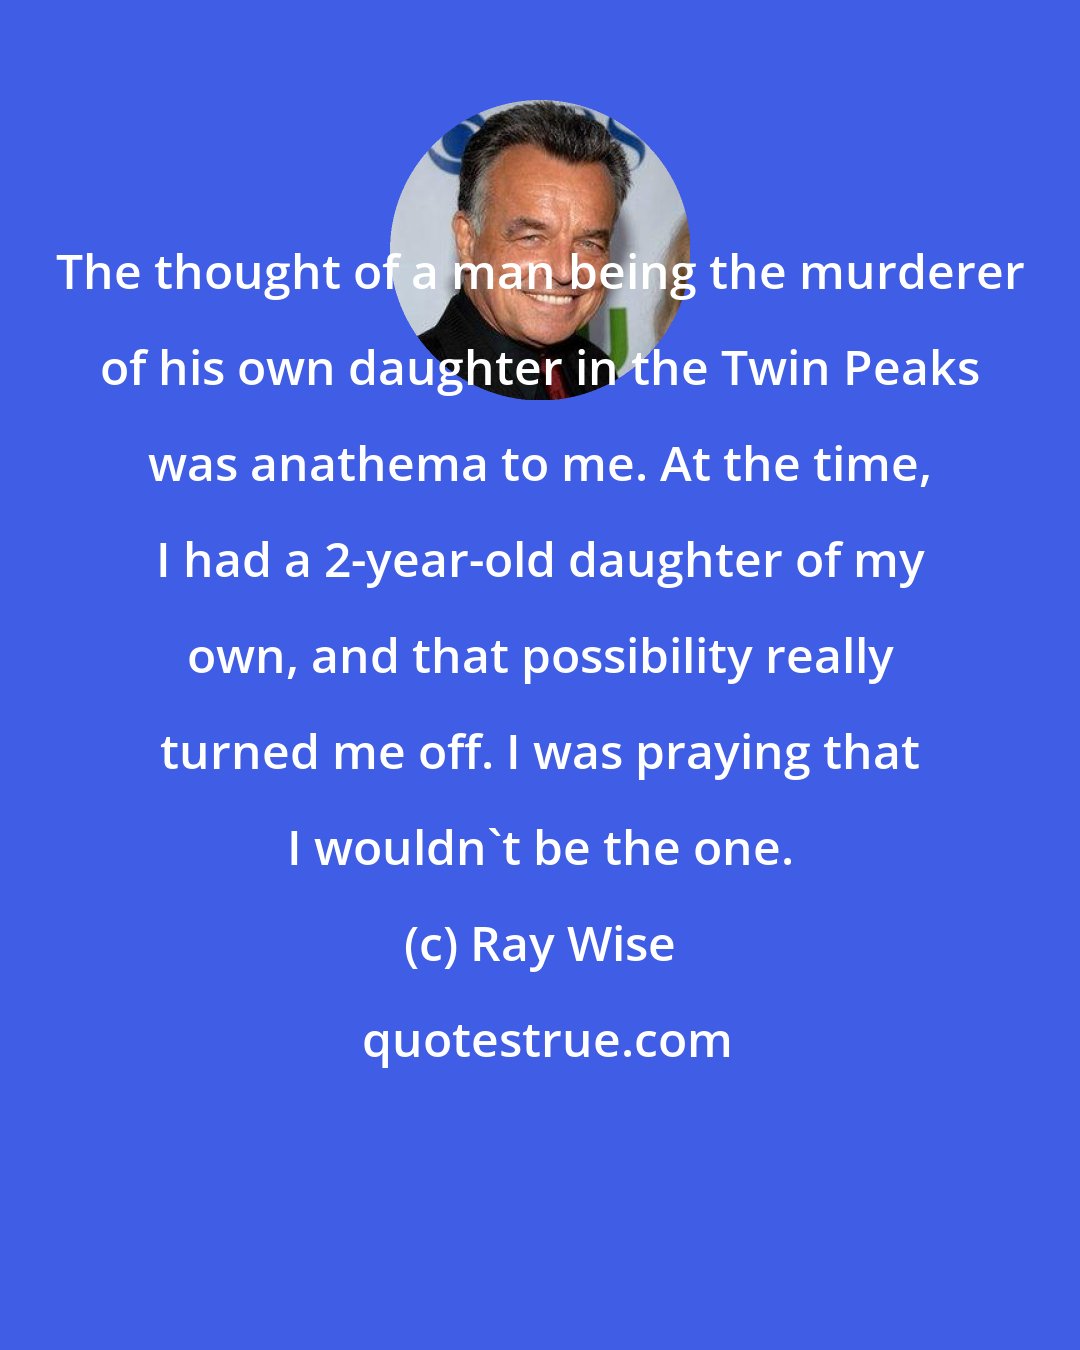 Ray Wise: The thought of a man being the murderer of his own daughter in the Twin Peaks was anathema to me. At the time, I had a 2-year-old daughter of my own, and that possibility really turned me off. I was praying that I wouldn't be the one.